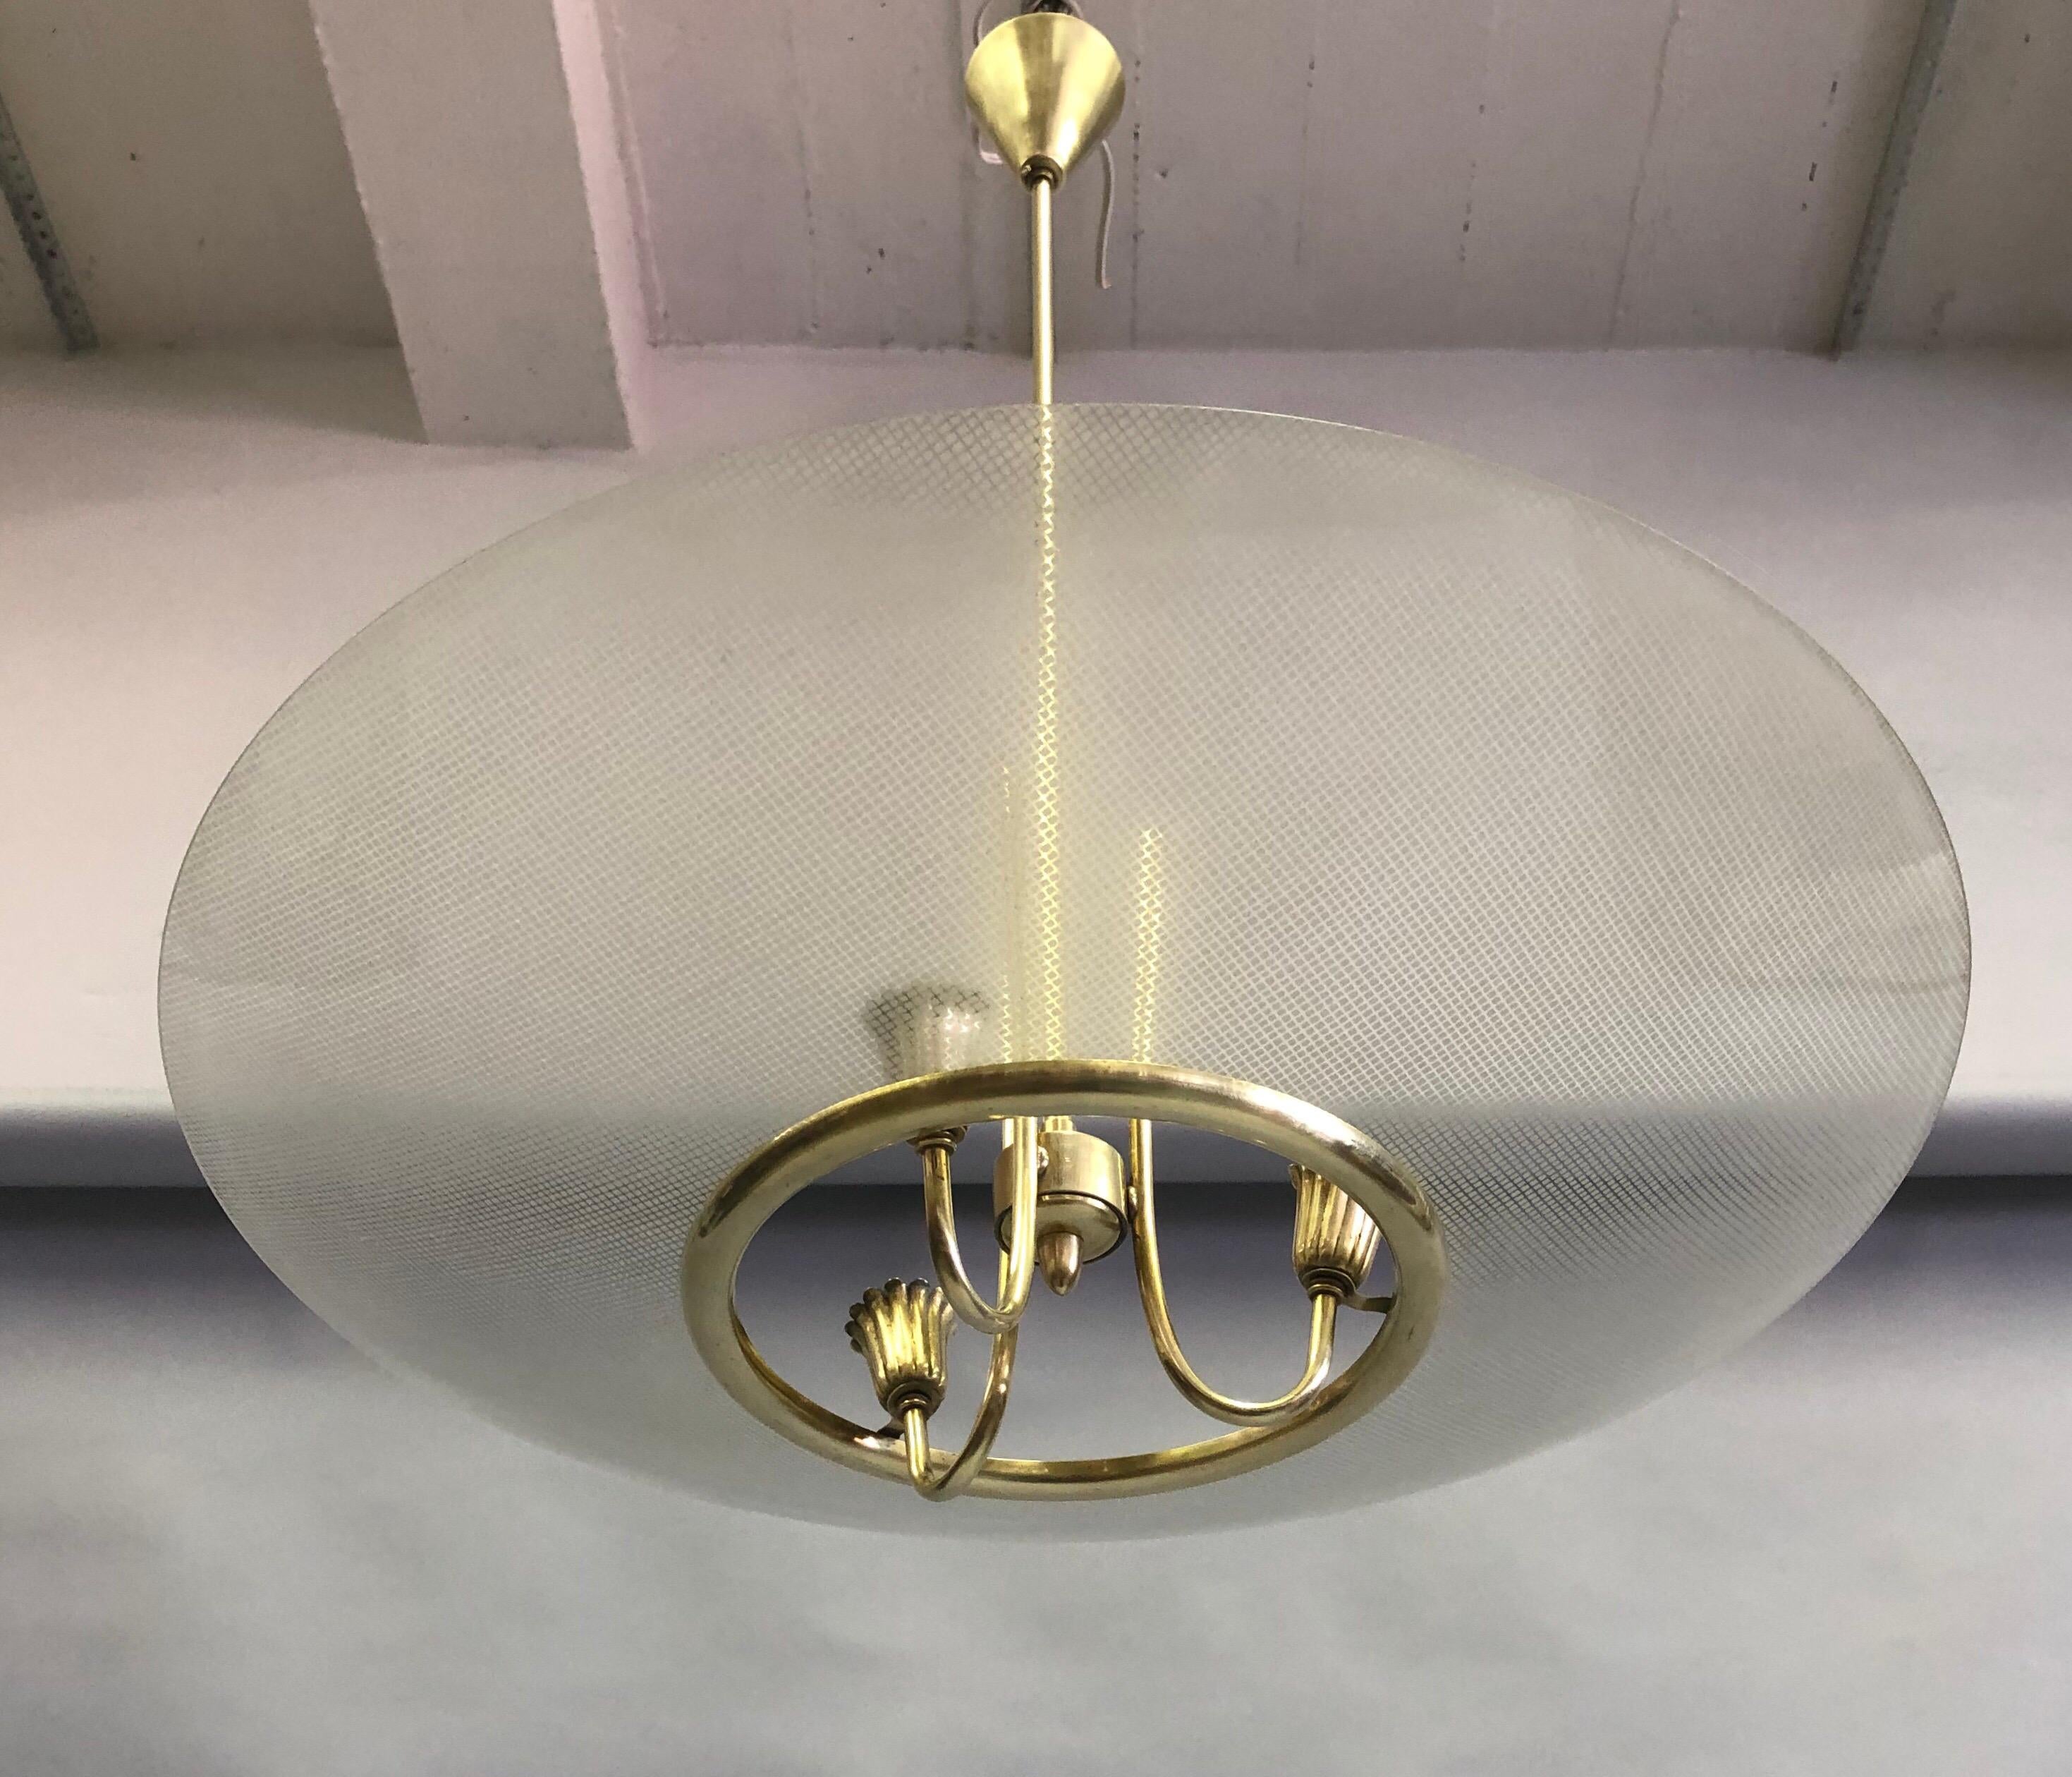 Elegant, timeless Italian Mid-Century Modern Neoclassical brass and sanitized glass chandelier / pendant by Pietro Chiesa for Fontana Arte, circa 1935-1940.

The piece features a unique frosted and satin glass reflector with a round, open circle